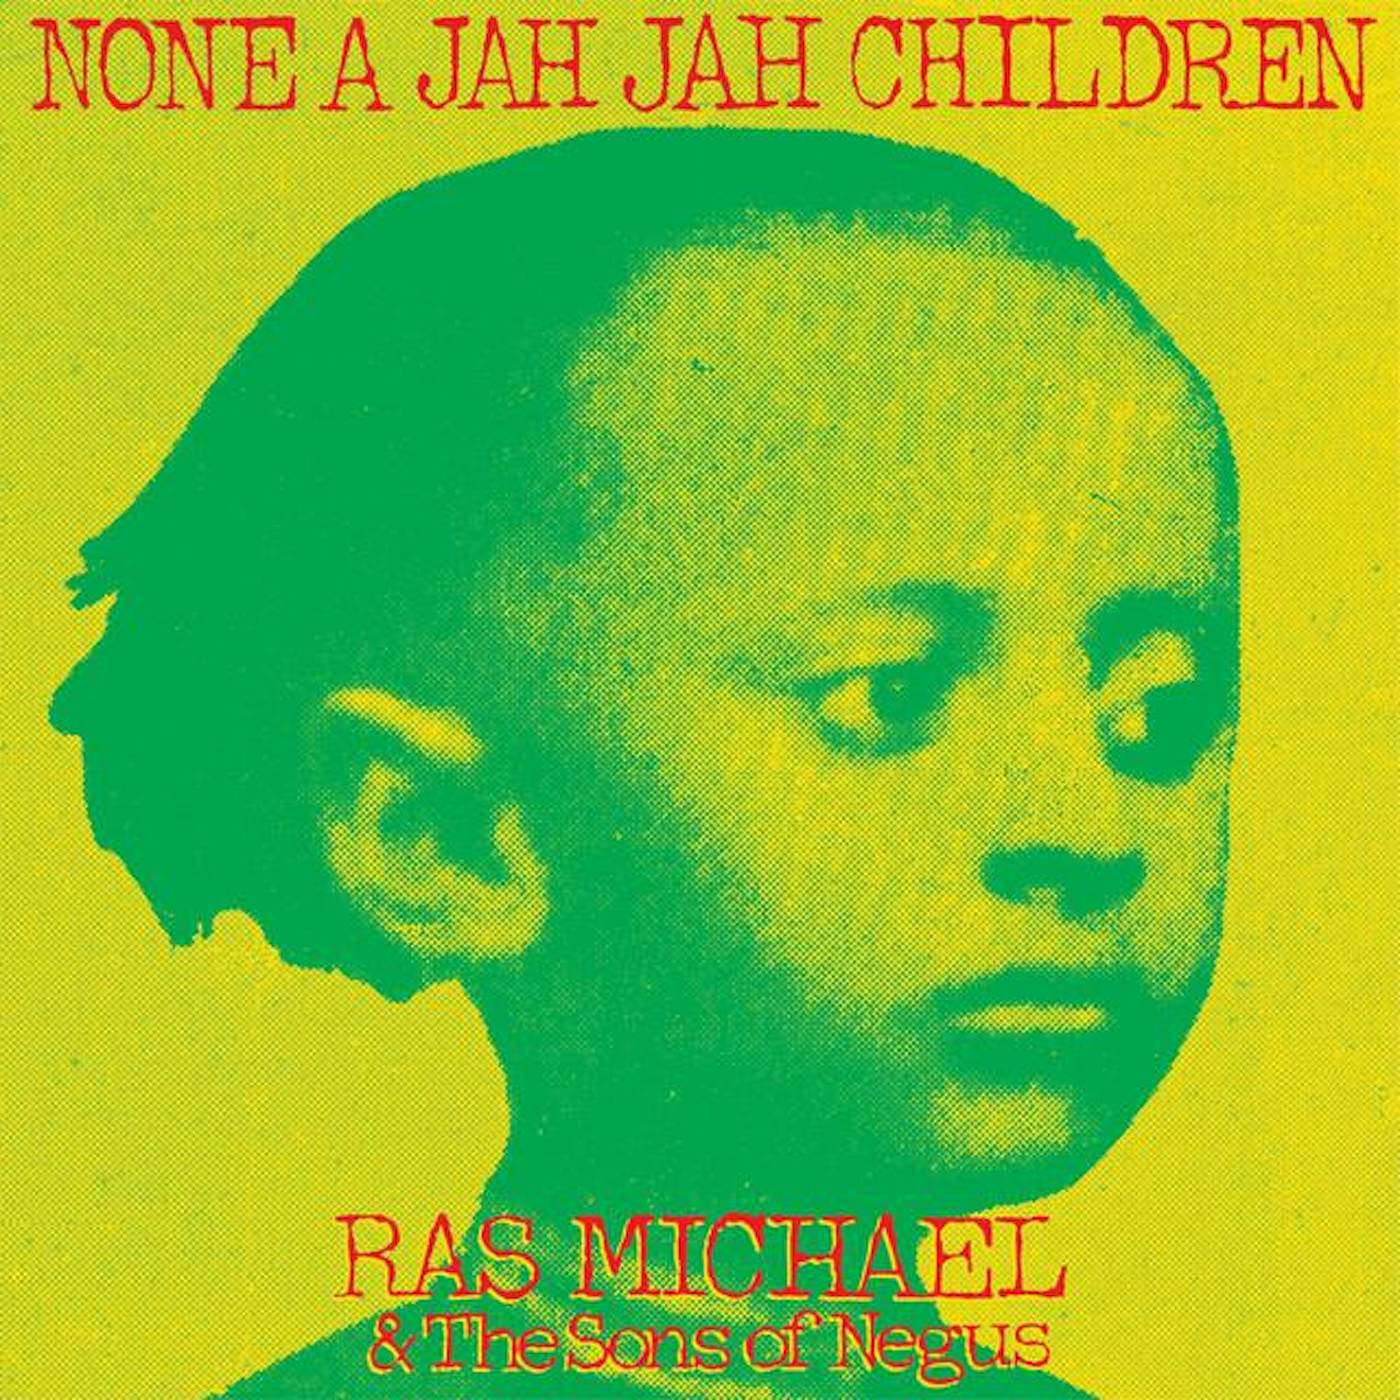 Ras Michael and The Sons Of Negus